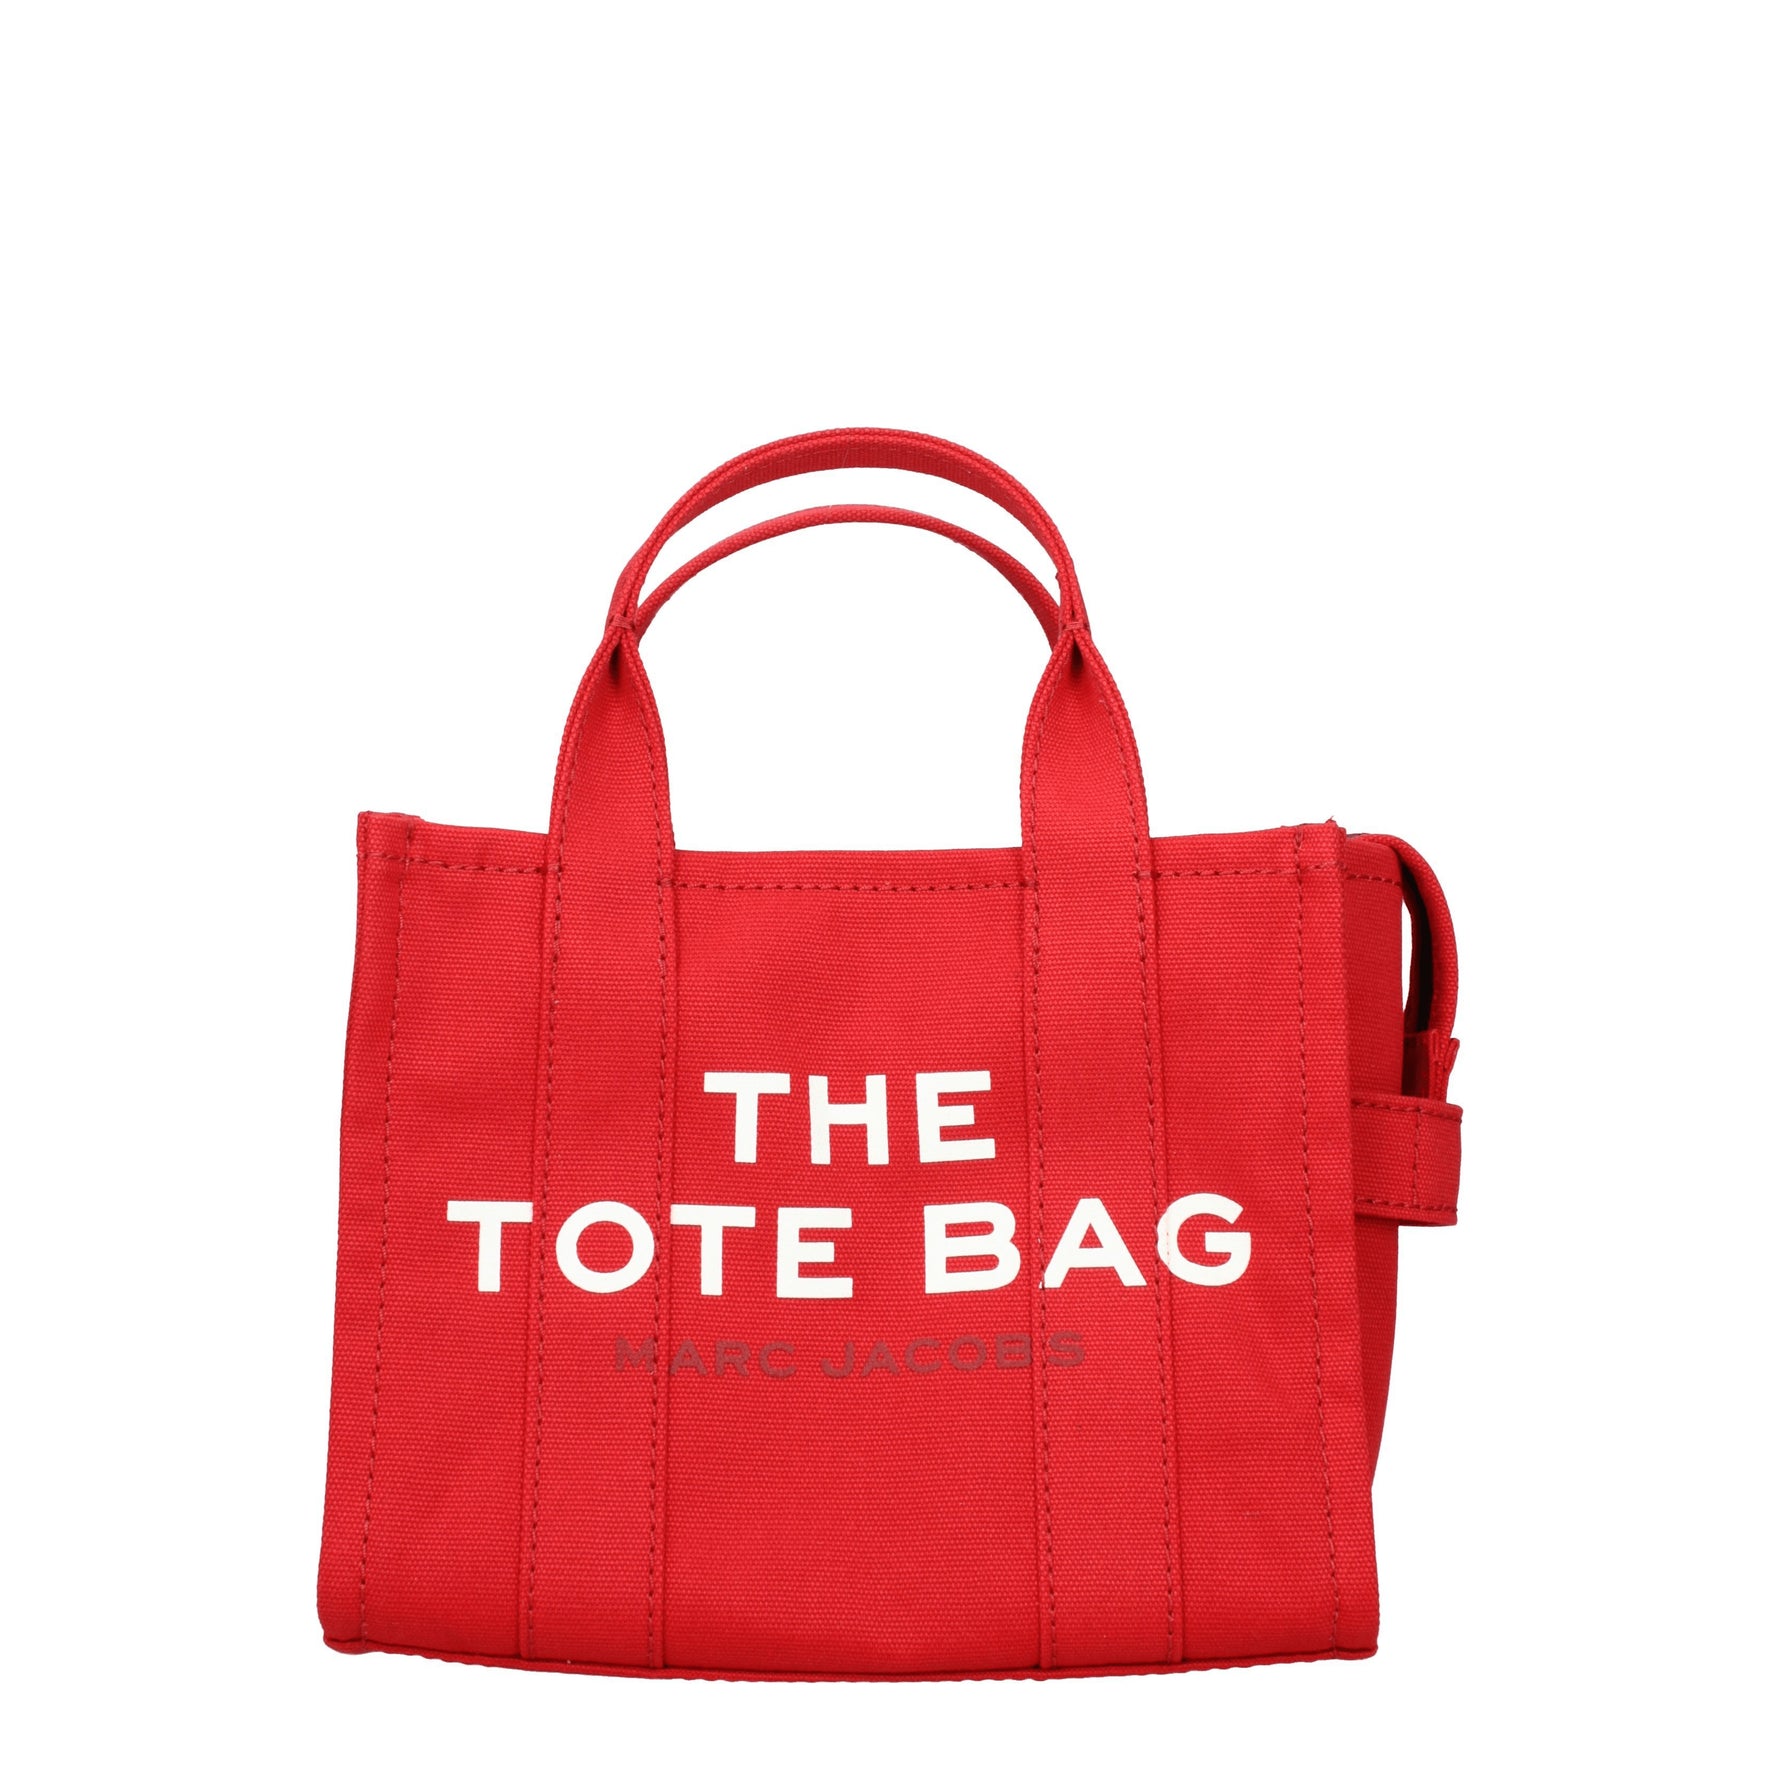 Marc Jacobs Borse a Mano the tote bag Donna Tessuto Rosso True Red